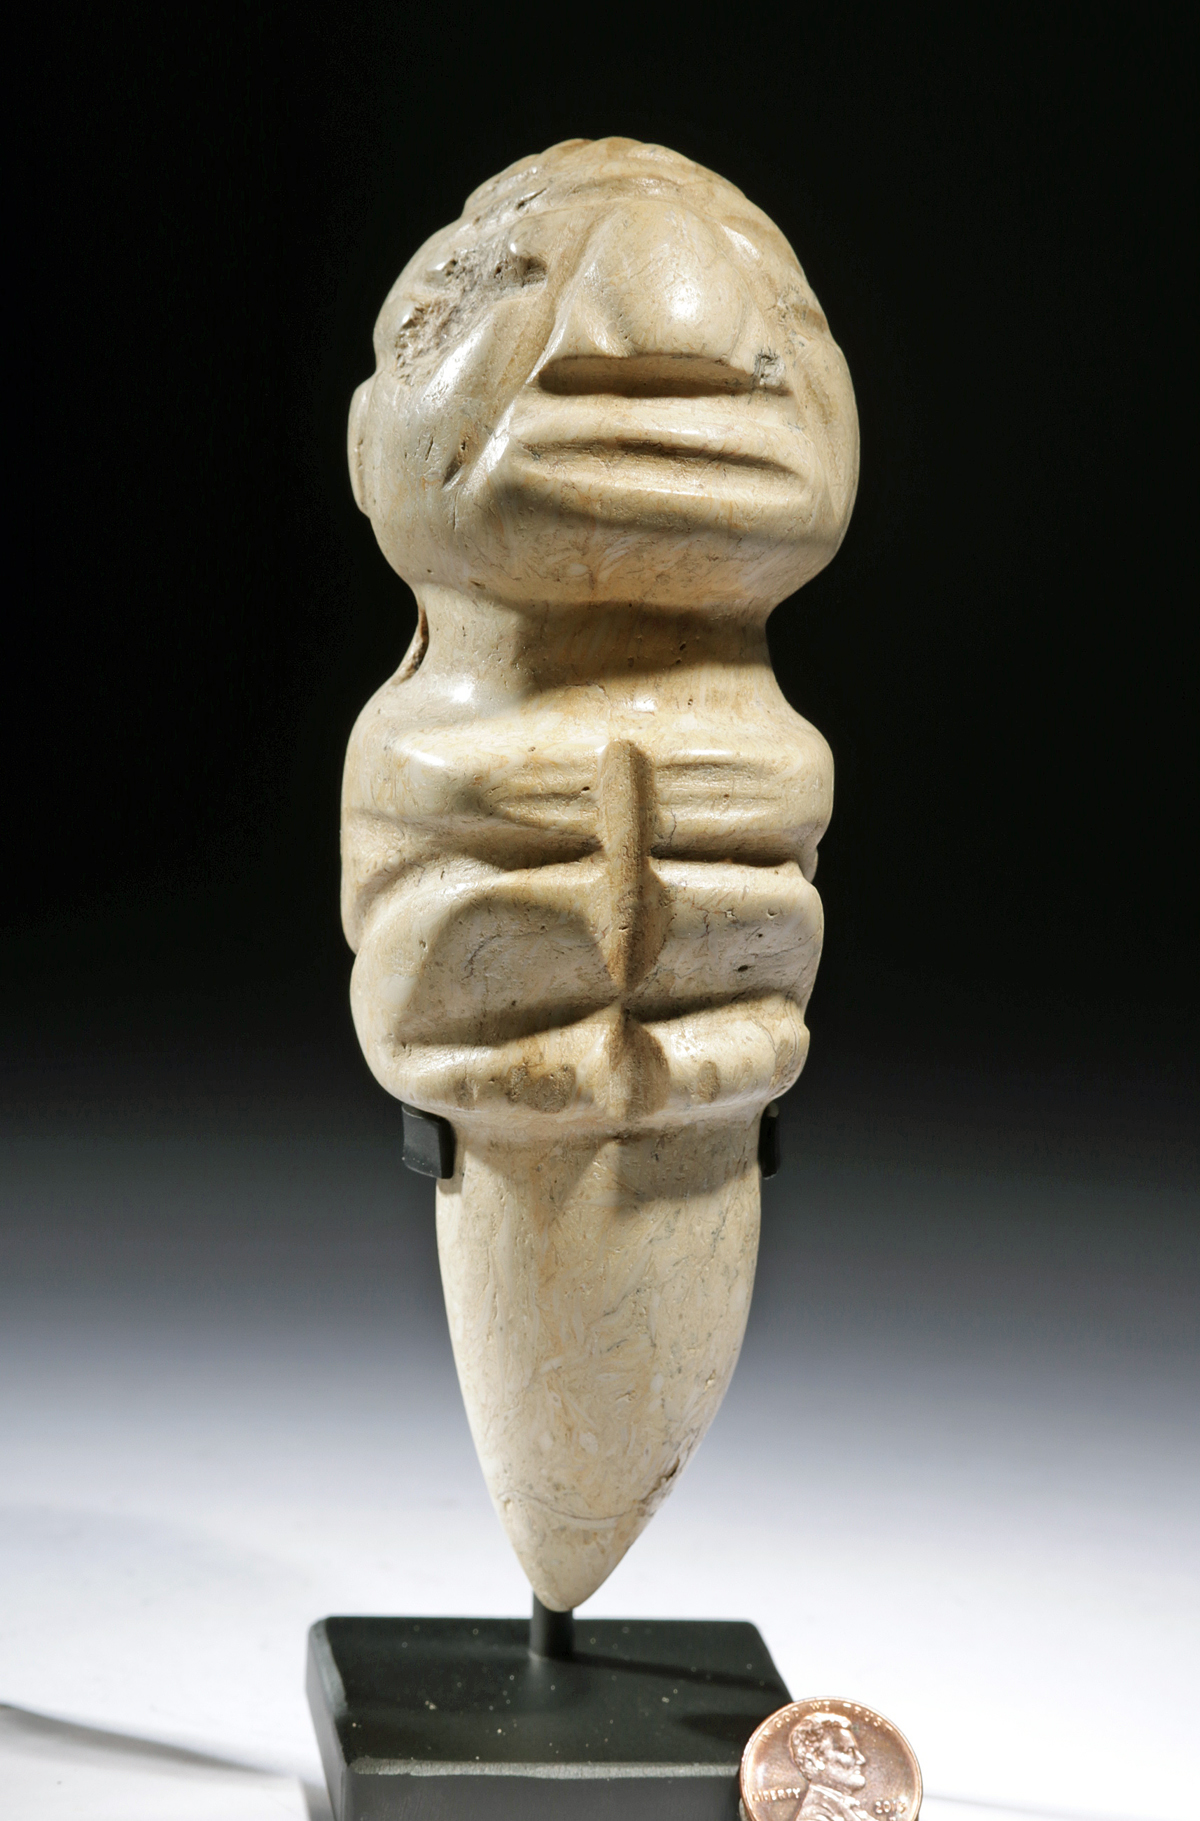 Large Costa Rican Stone Figural Amulet - Image 2 of 4